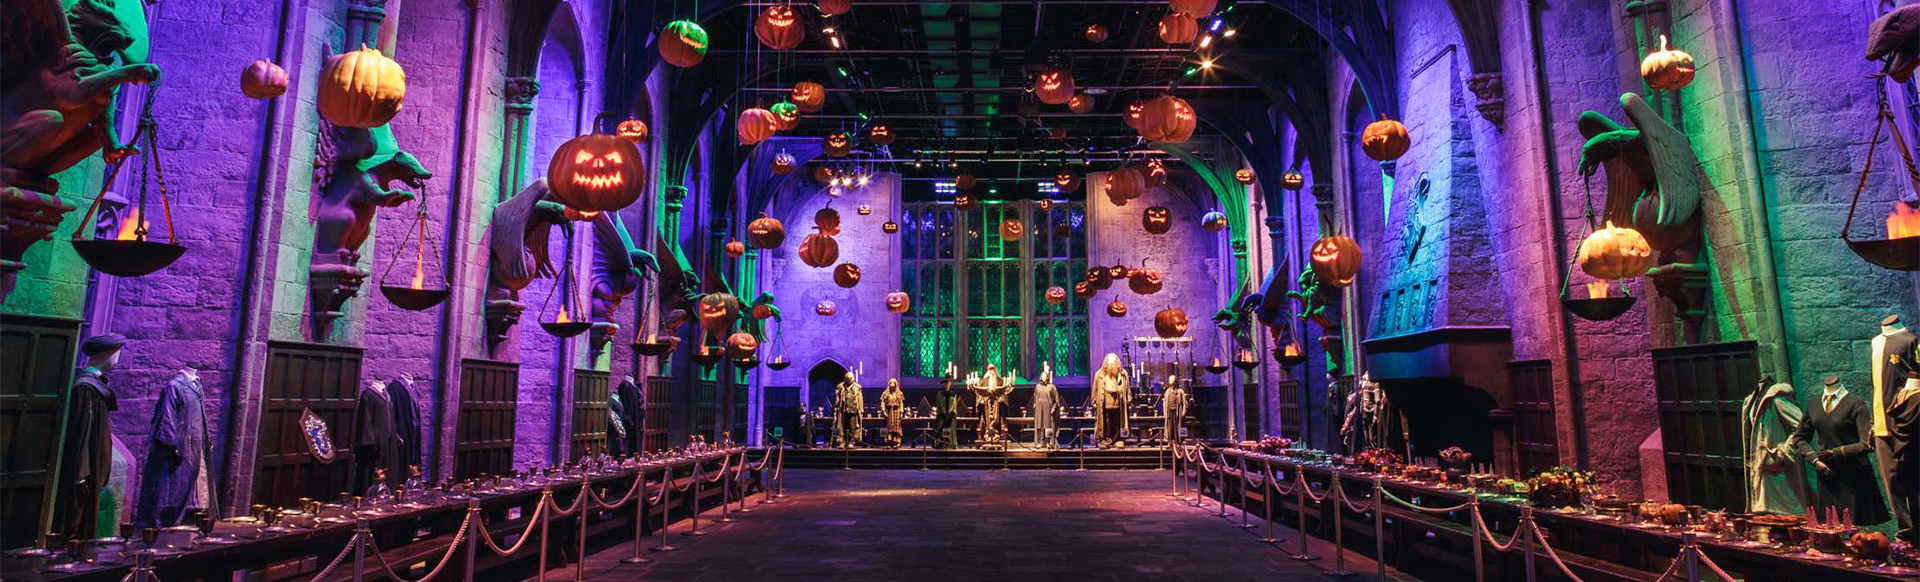 The Great Hall Harry Potter film set is filled with floating pumpkins and purple light for Halloween. 